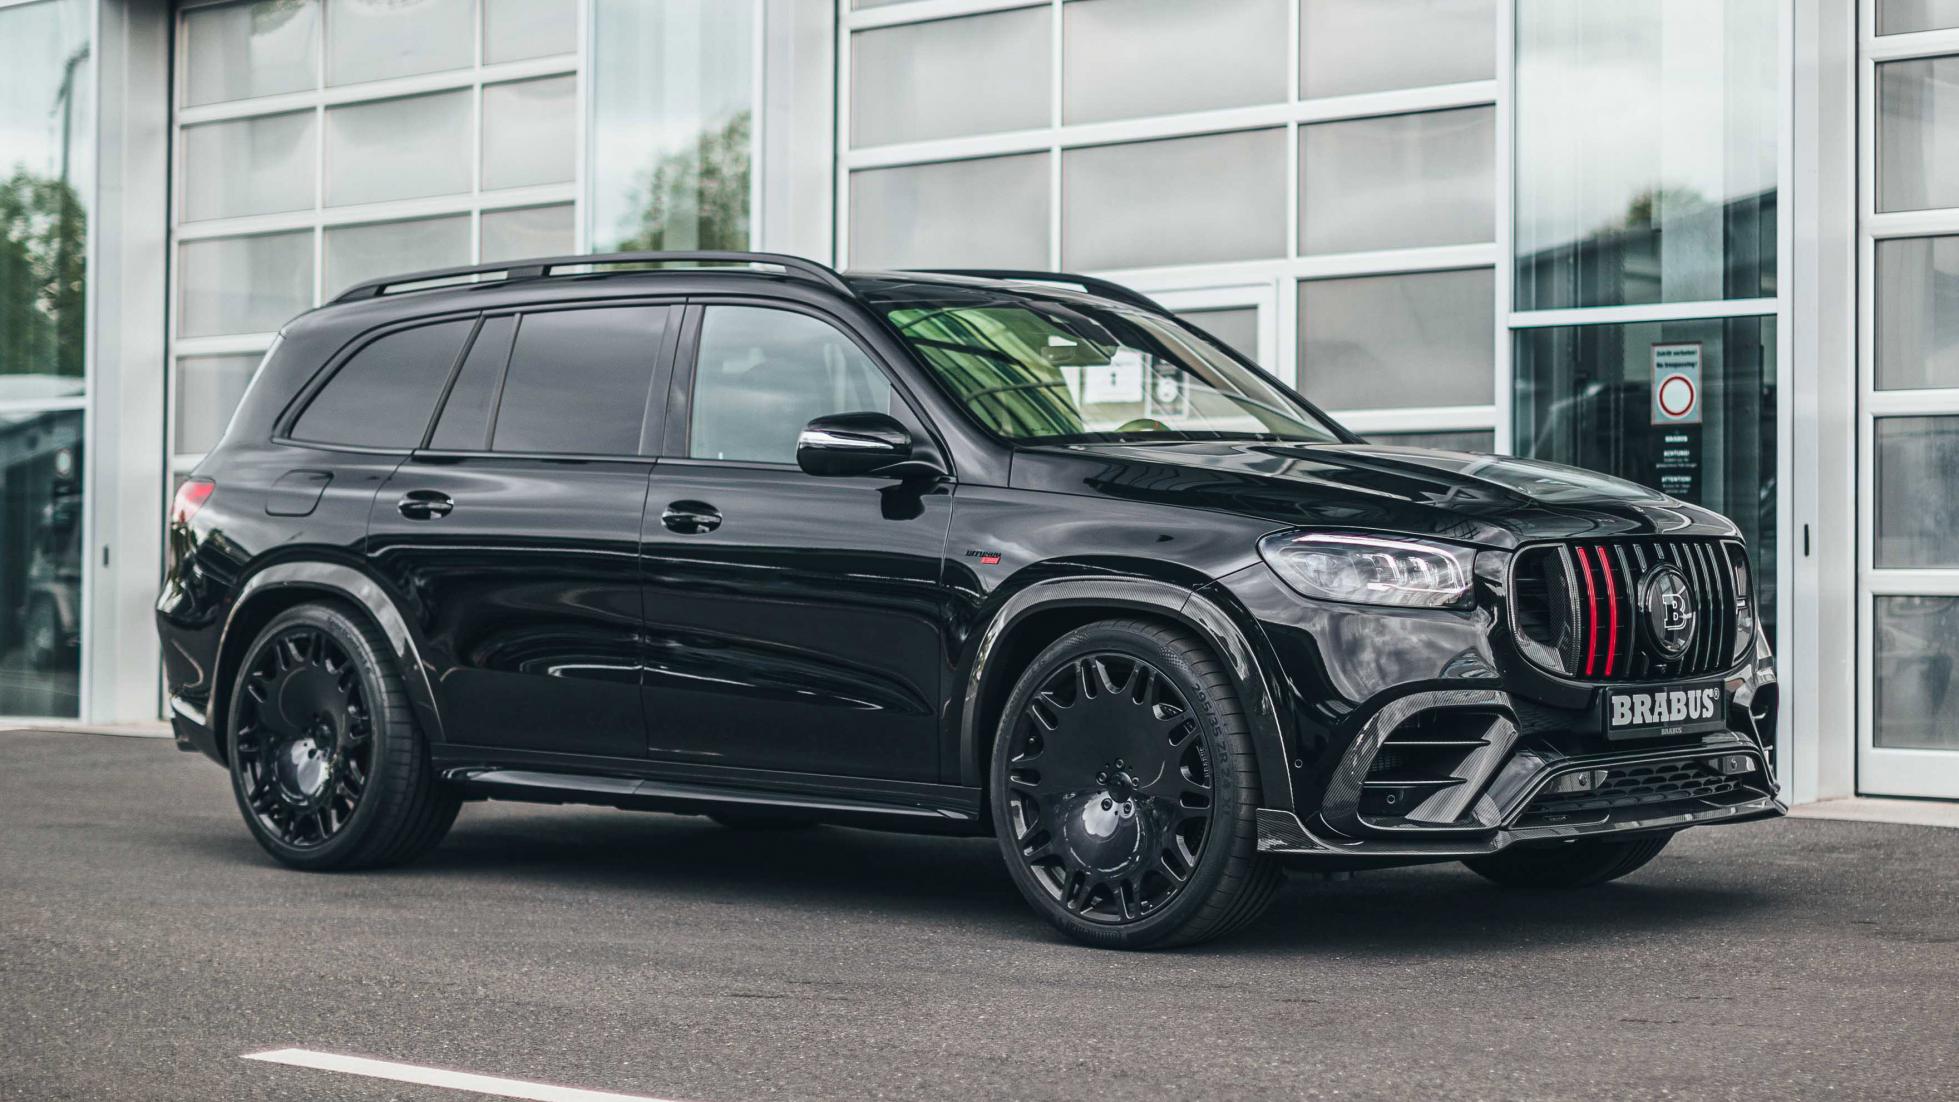 Brabus will now sell you an 800bhp Mercedes-AMG GLS